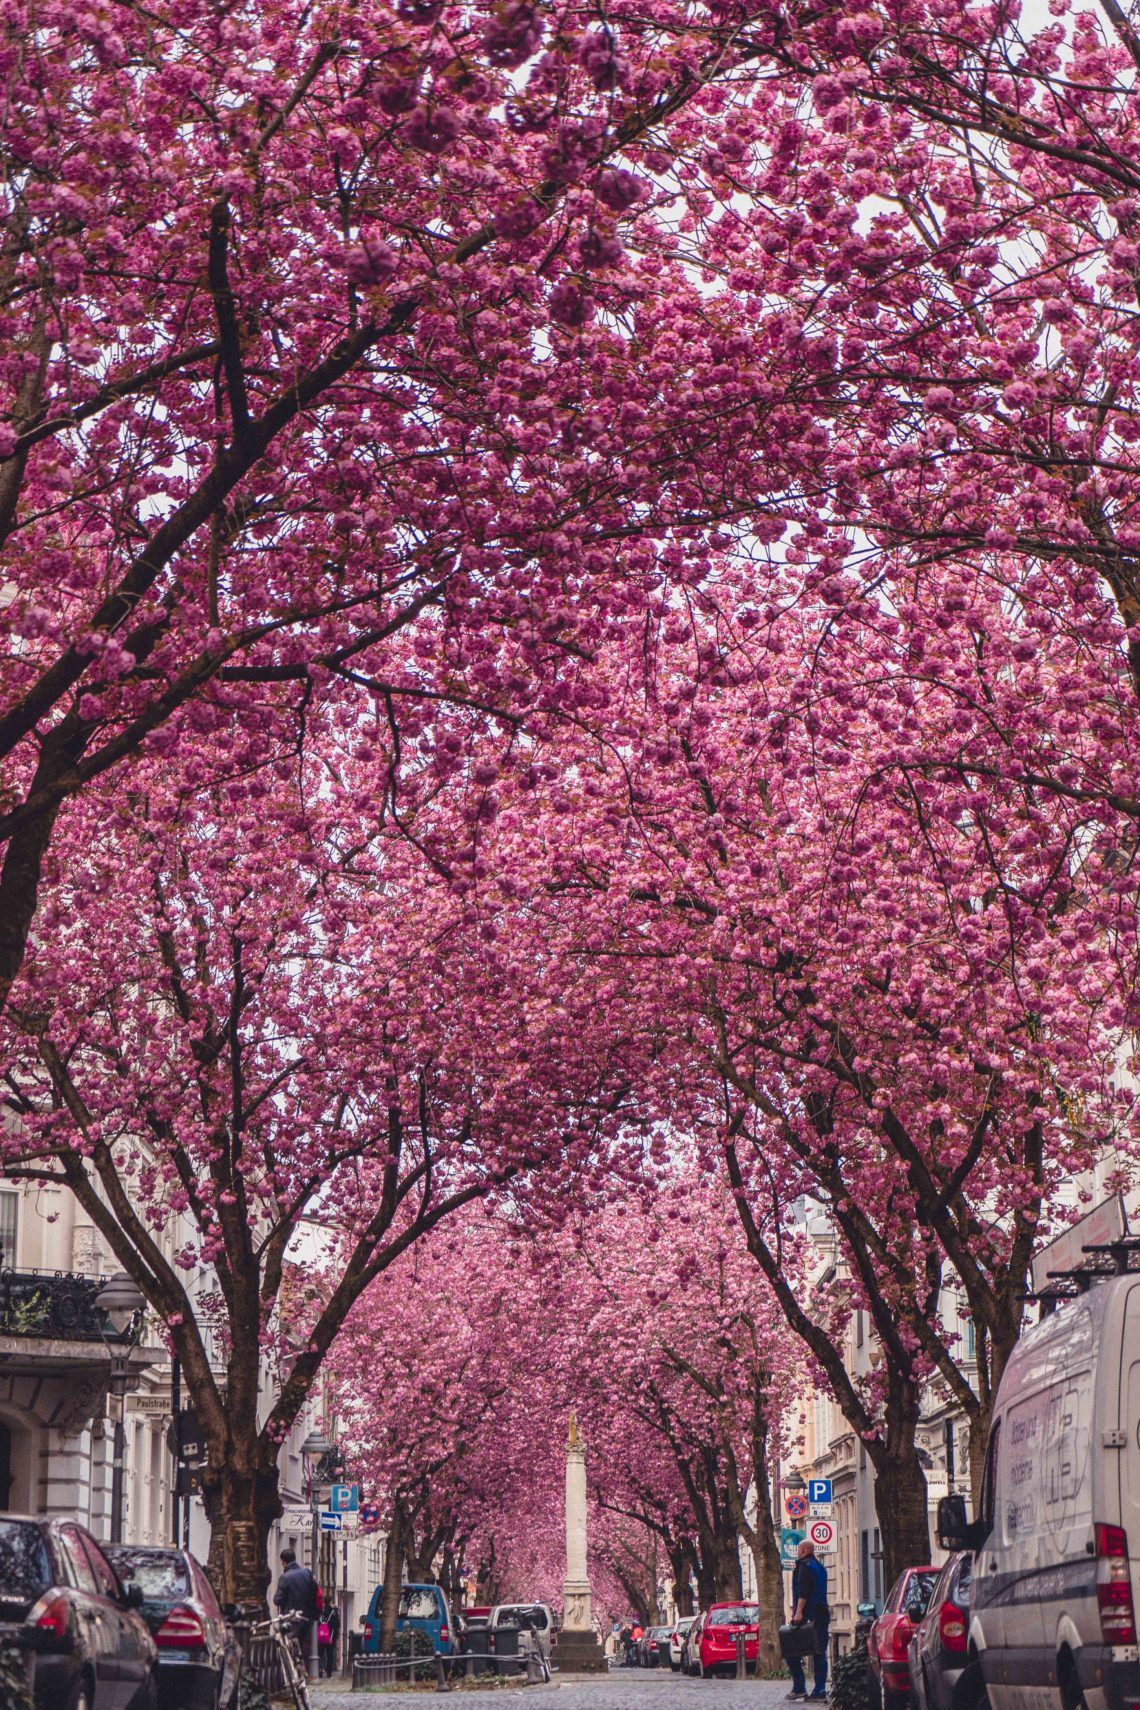 what are the stunning cities to see cherry blossoms in full bloom?